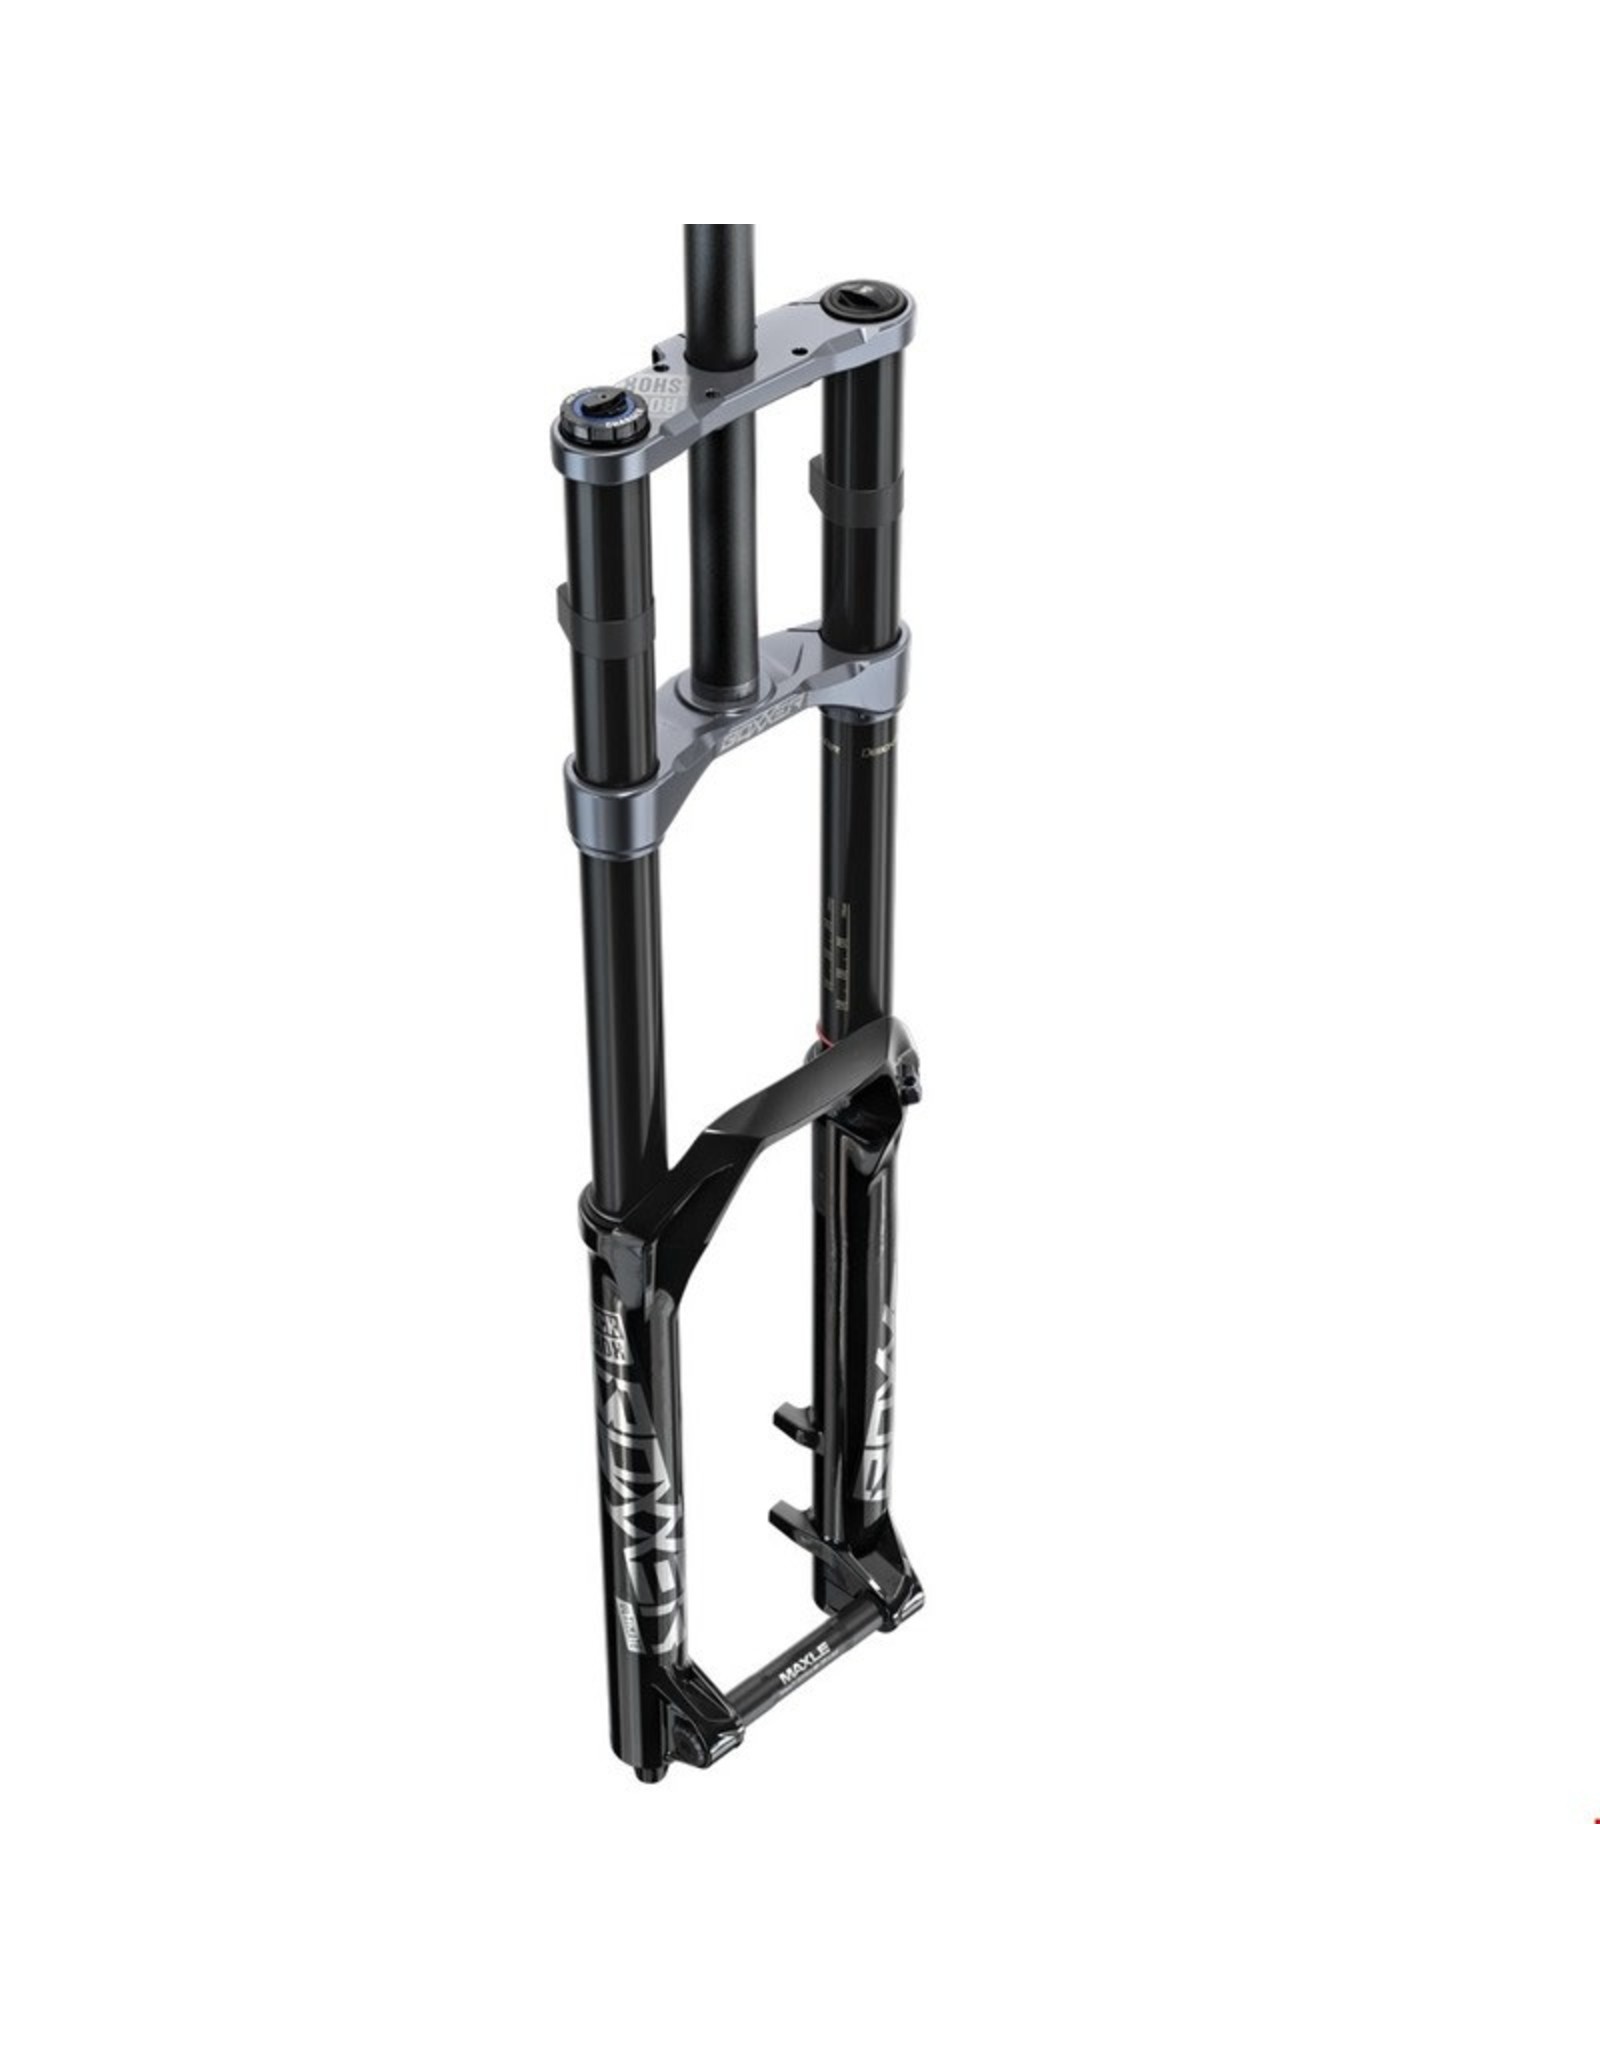 Rock Shox ROCK SHOX FORK BOXXER ULTIMATE CHARGER 2.1 R 29 BOOST 20x110 200mm BLACK 46 OFFSET